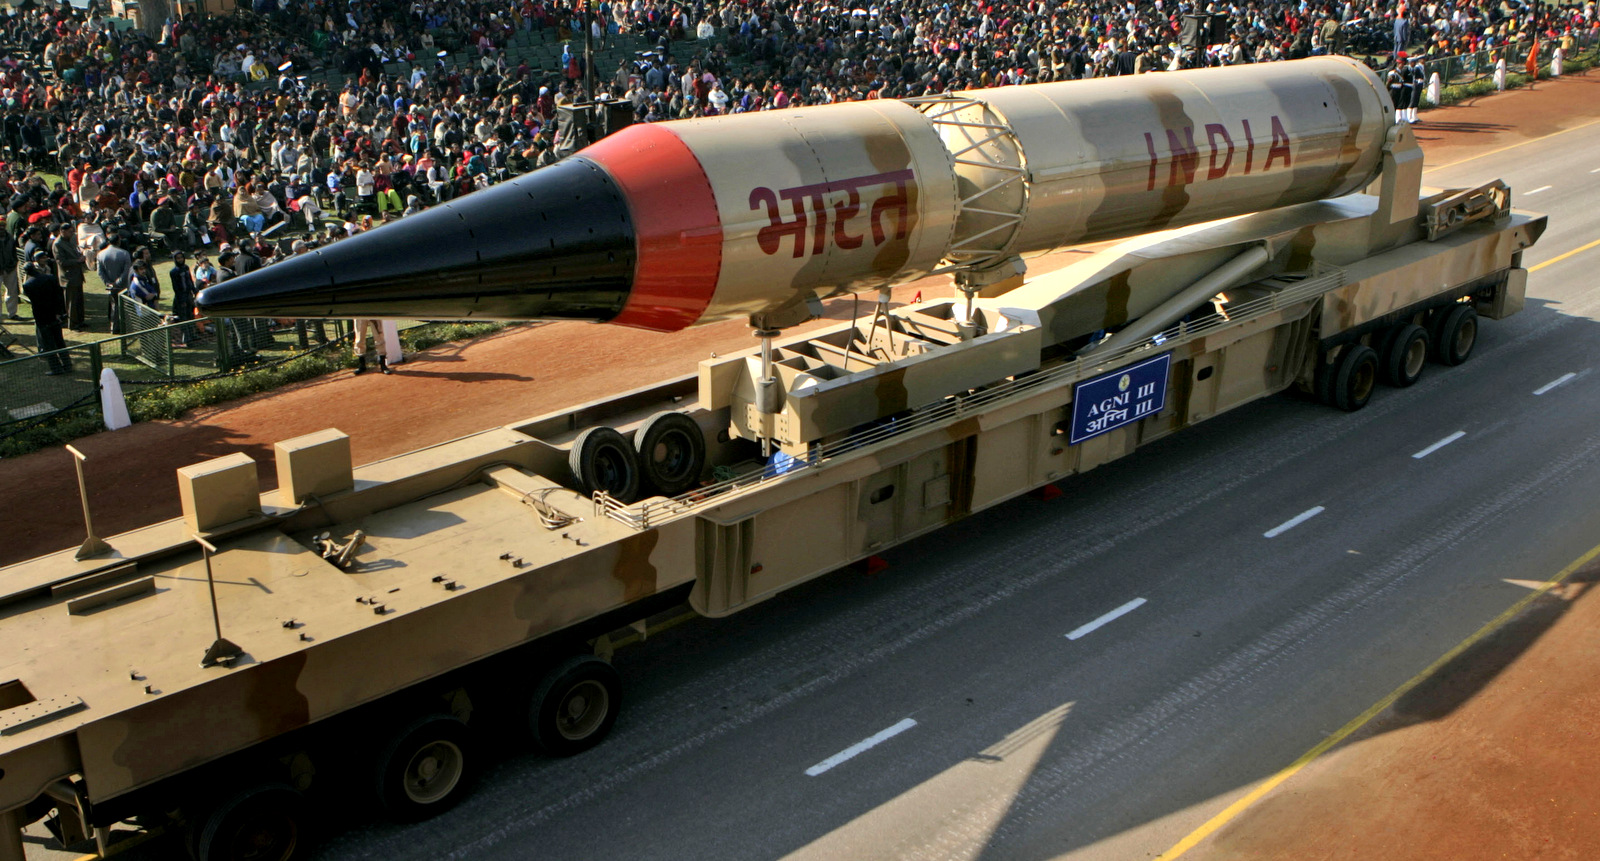 India's Agni III, a nuclear-capable missile that can hit targets from Beijing to Baghdad. (AP Photo/Manish Swarup)